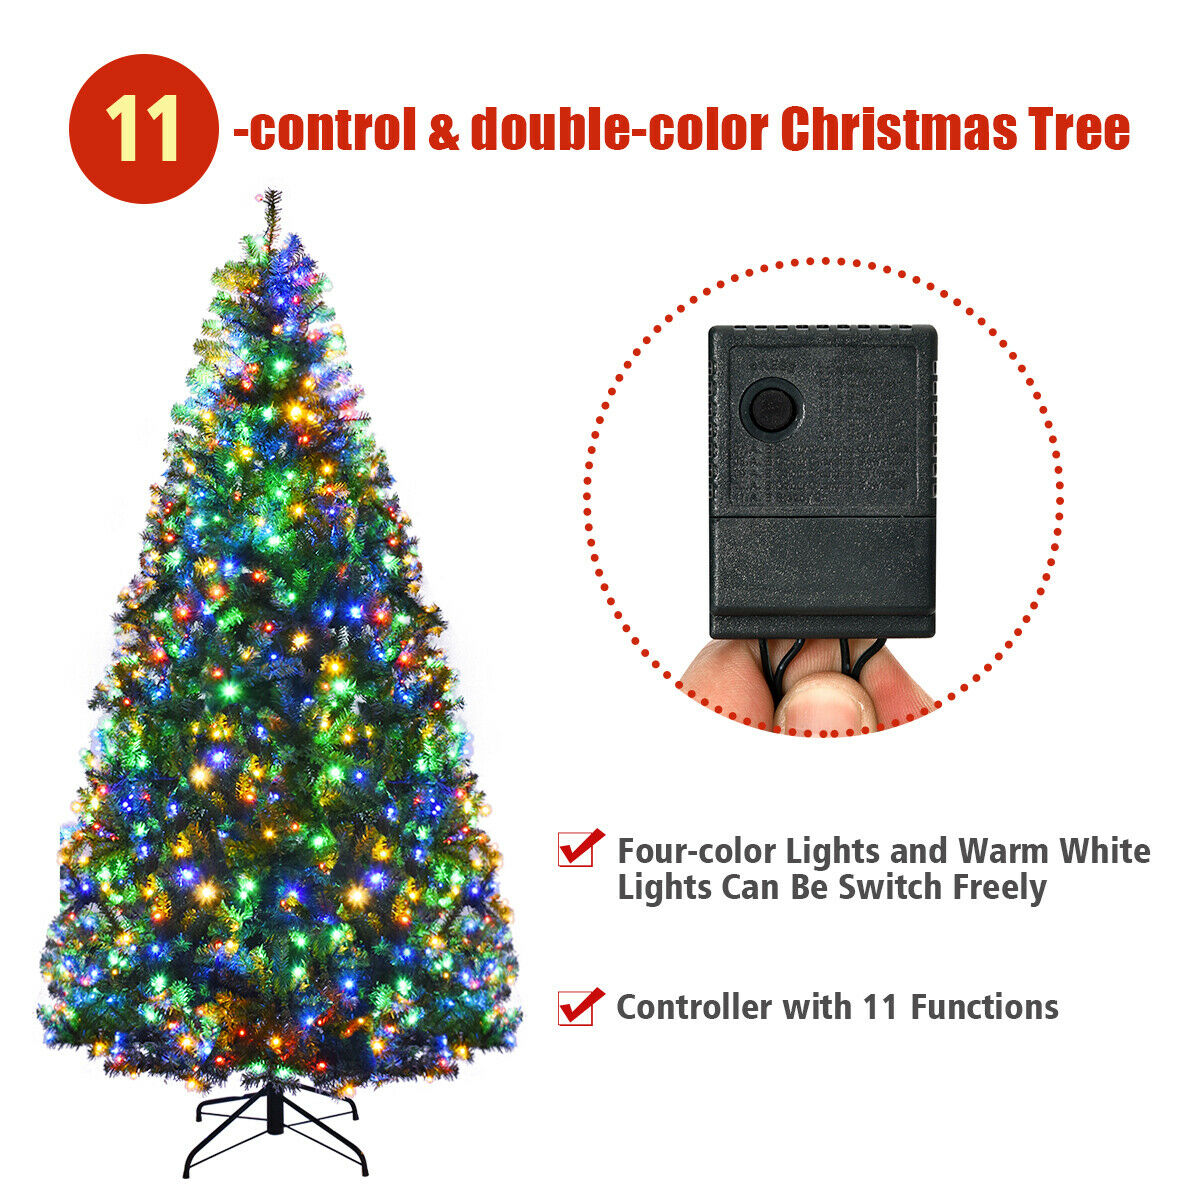 7-ft Pre-Lit Premium Christmas Tree With 500 Multicolored LED Lights & Stand